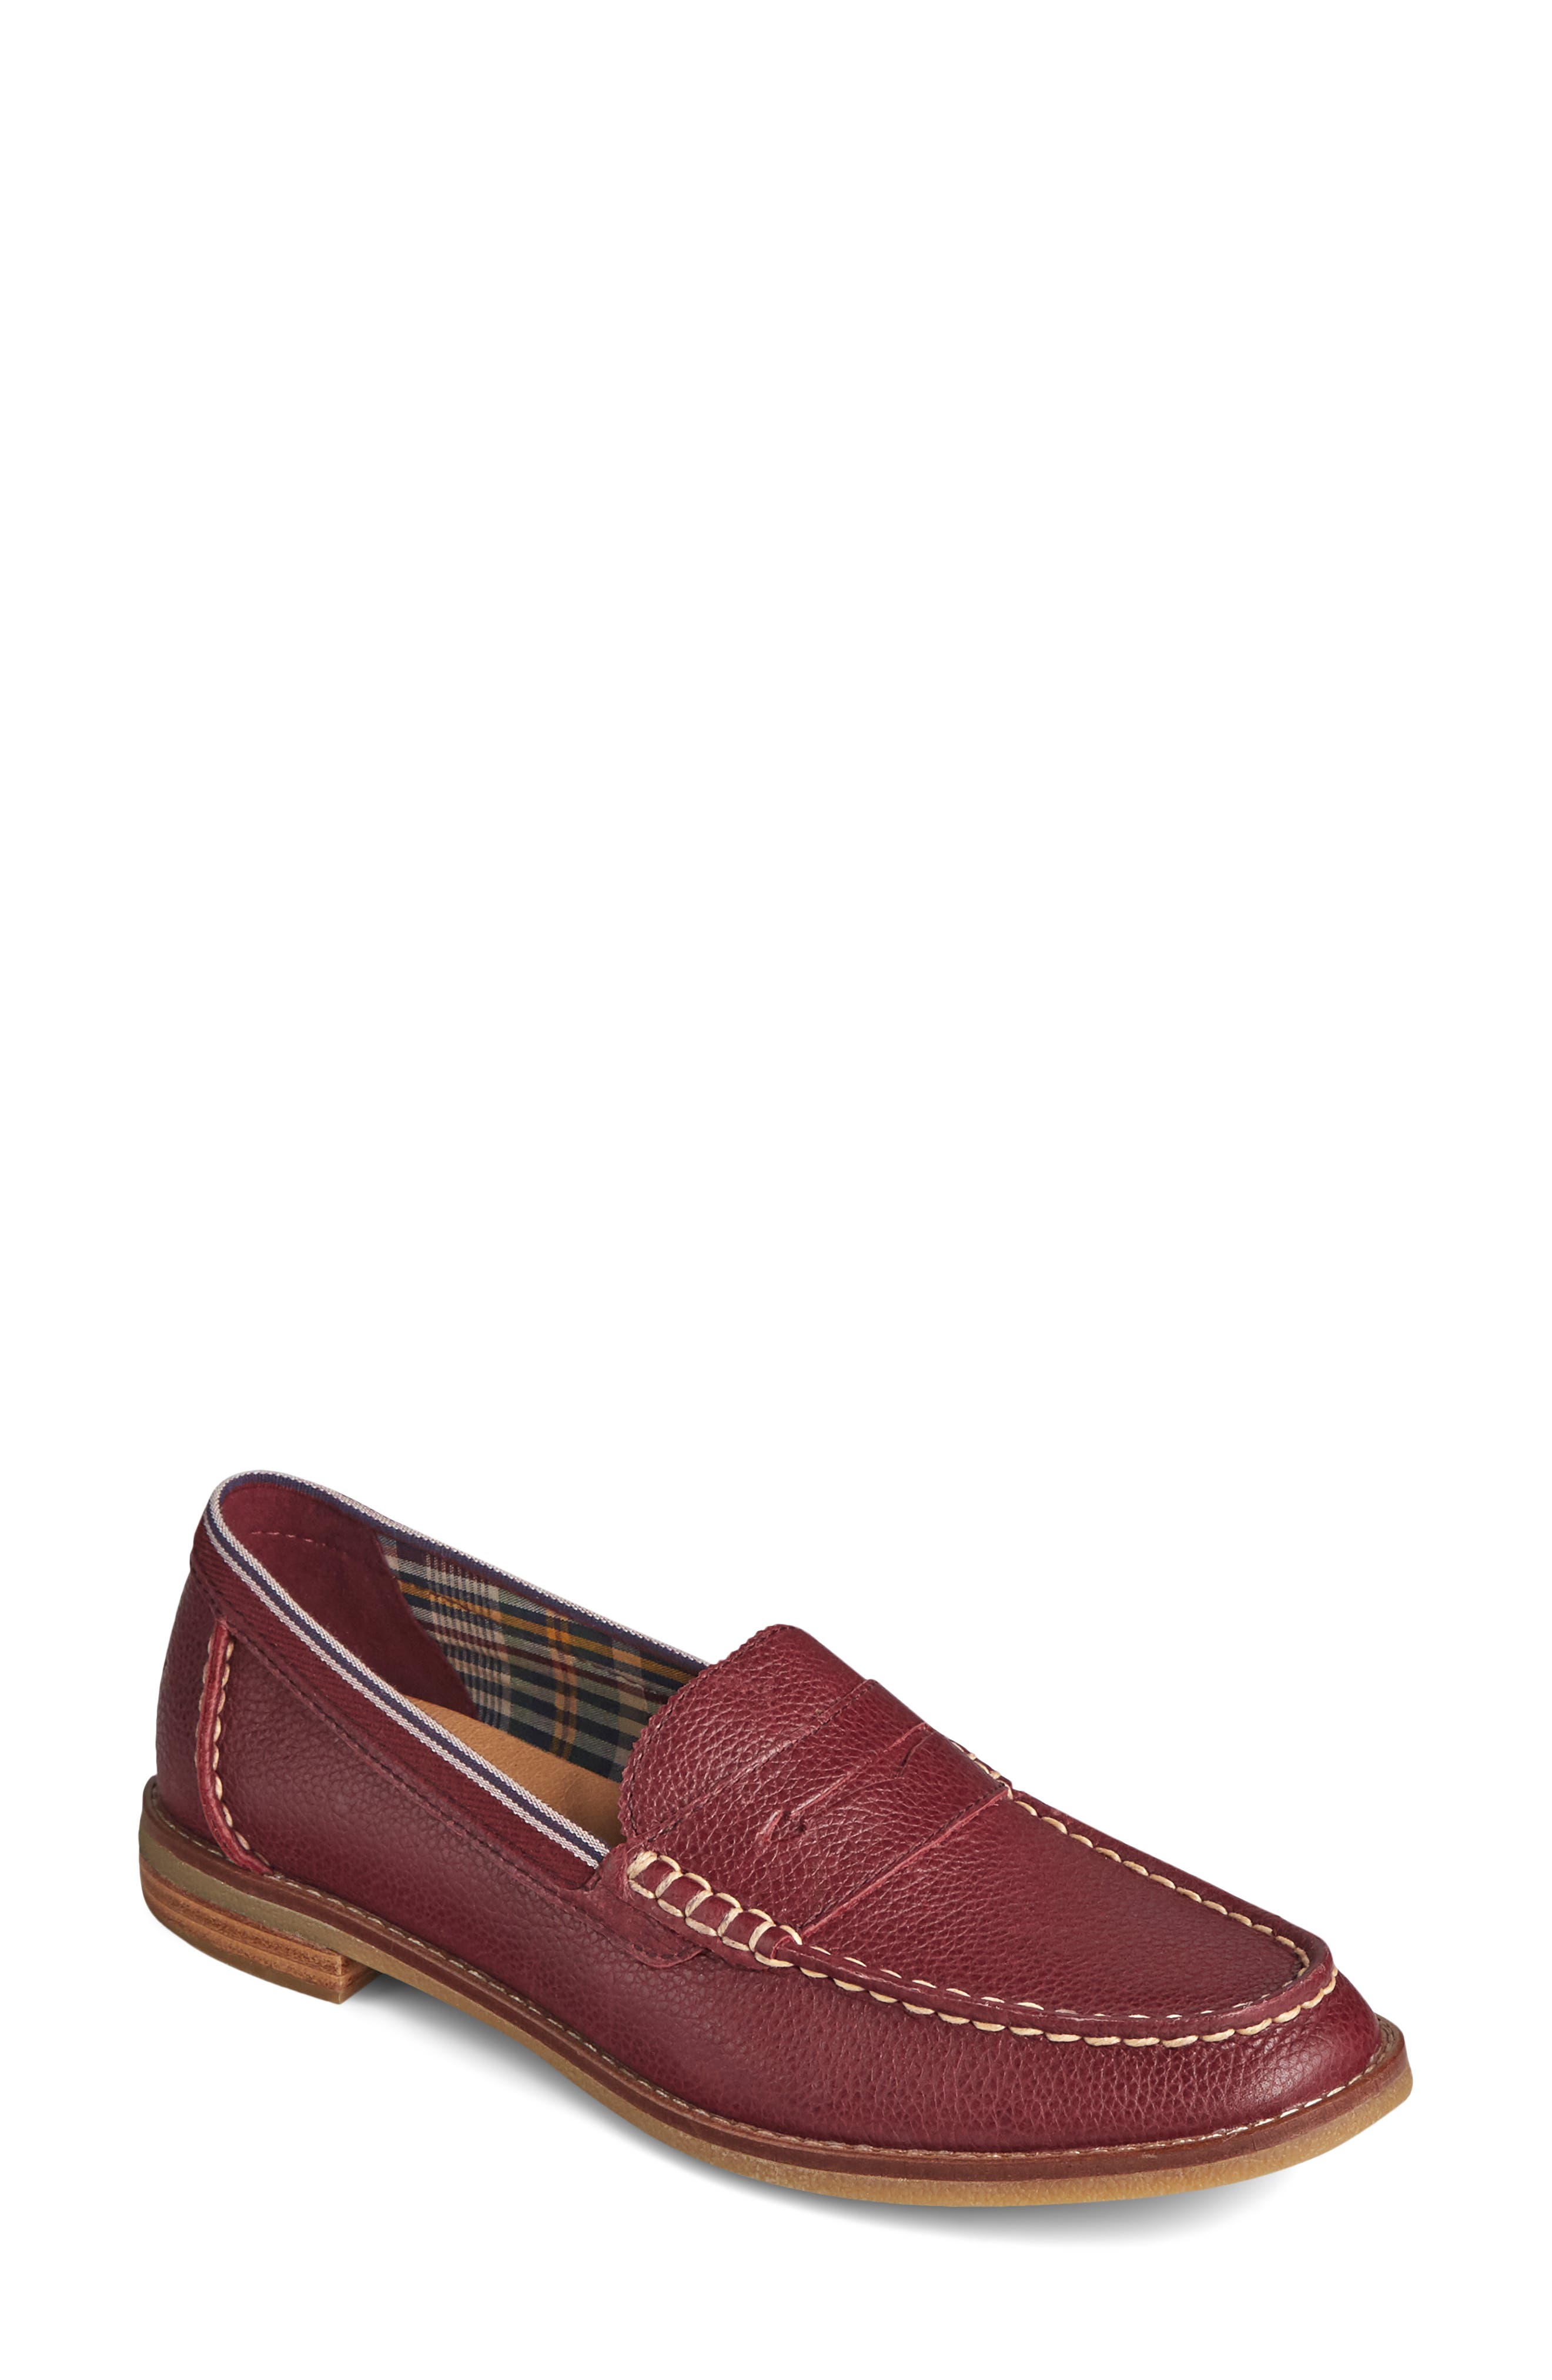 sperry loafers canada